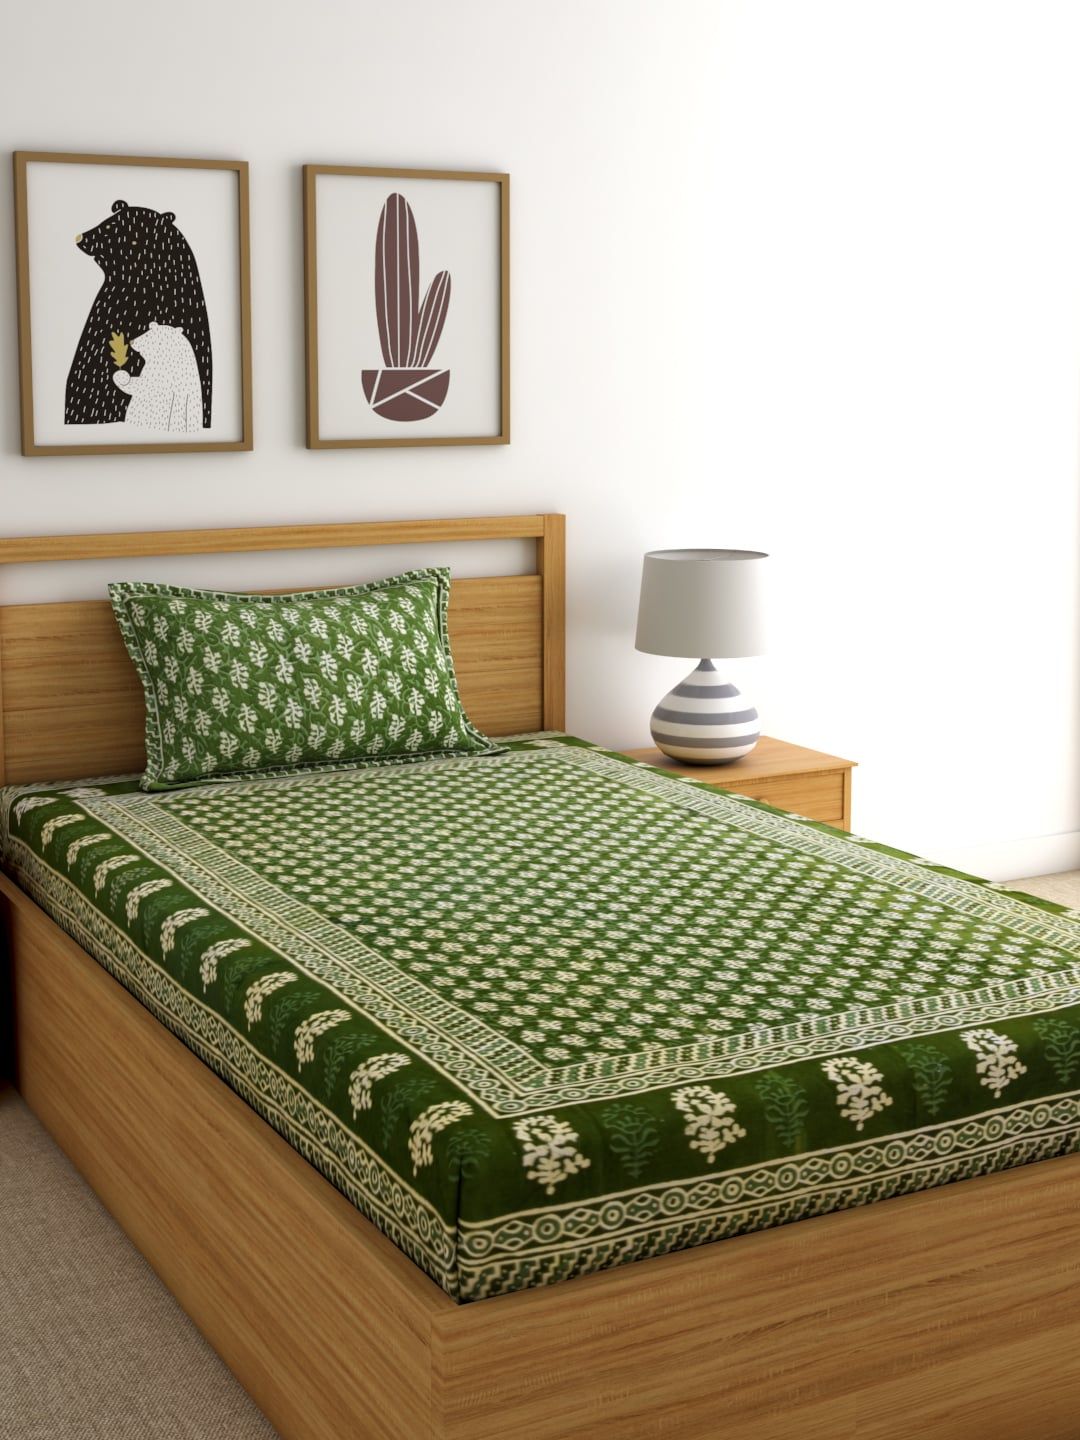 Rajasthan Decor Green Screen Printed 144 TC Cotton 1 Single Bedsheet with 1 Pillow Cover Price in India